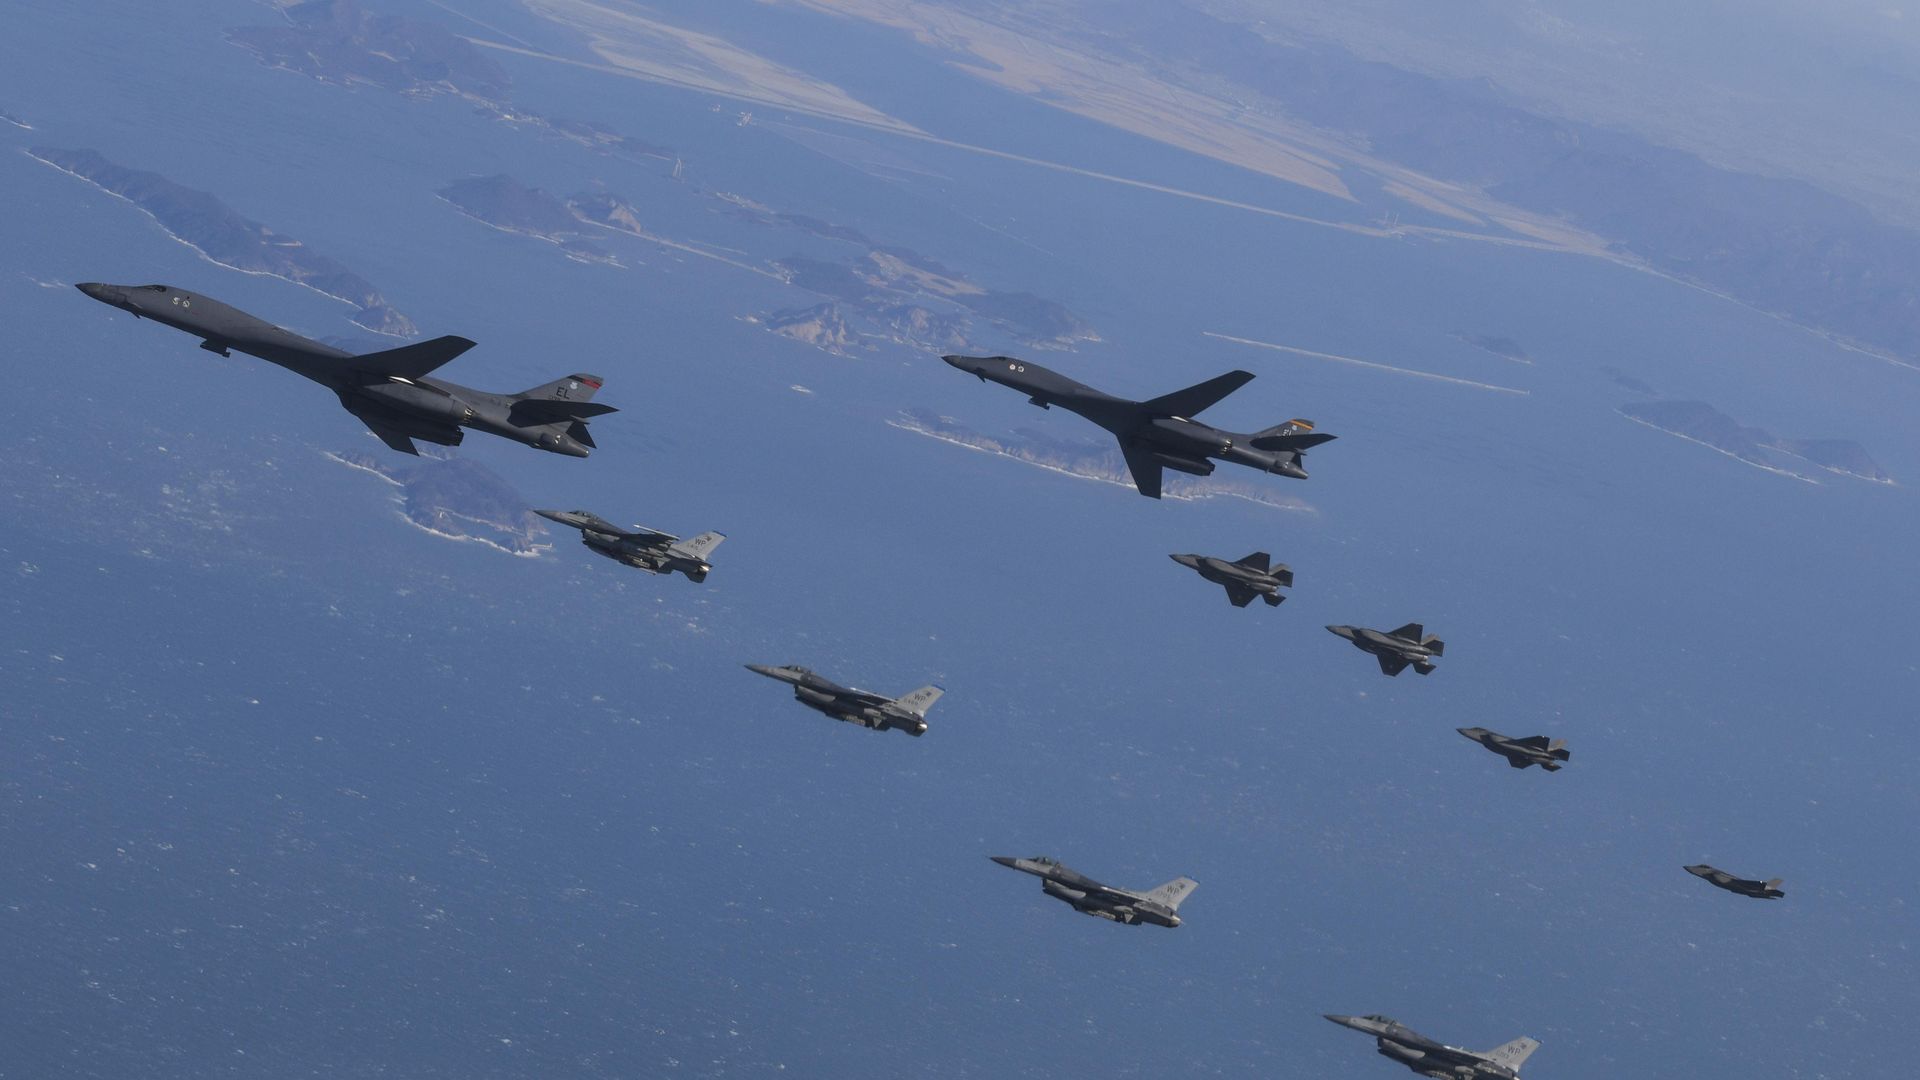 U.S. Air Force B-1B bombers, F-16 fighter jets and South Korean Air Force F-35A fighter jets fly over South Korea Peninsula during a joint air drill on February 19, 2023